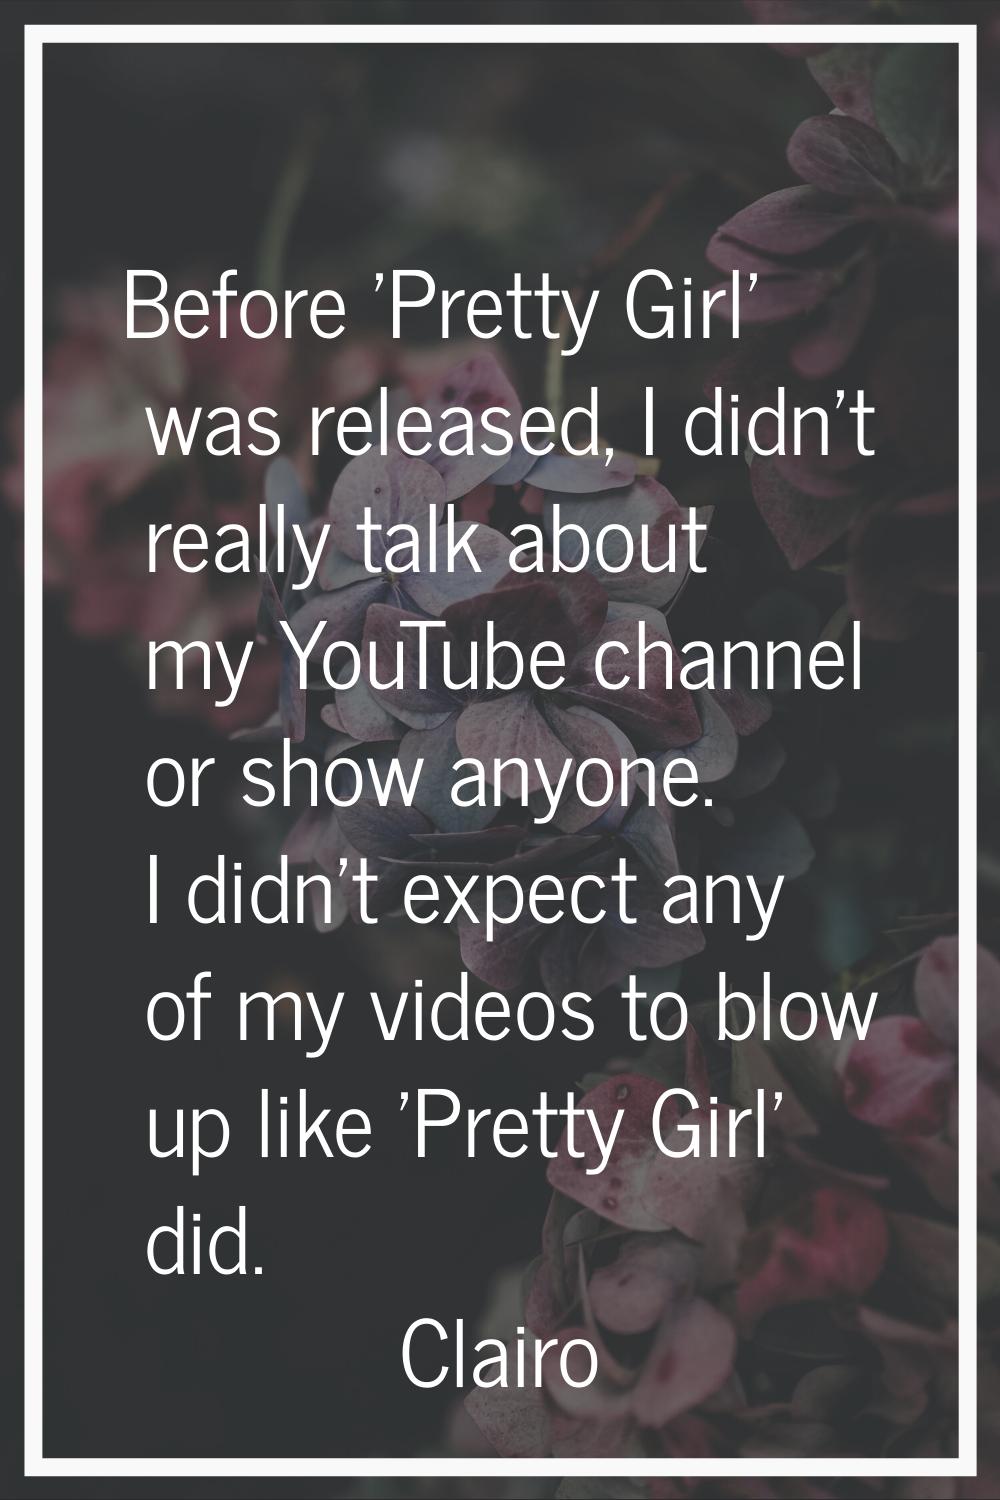 Before 'Pretty Girl' was released, I didn't really talk about my YouTube channel or show anyone. I 